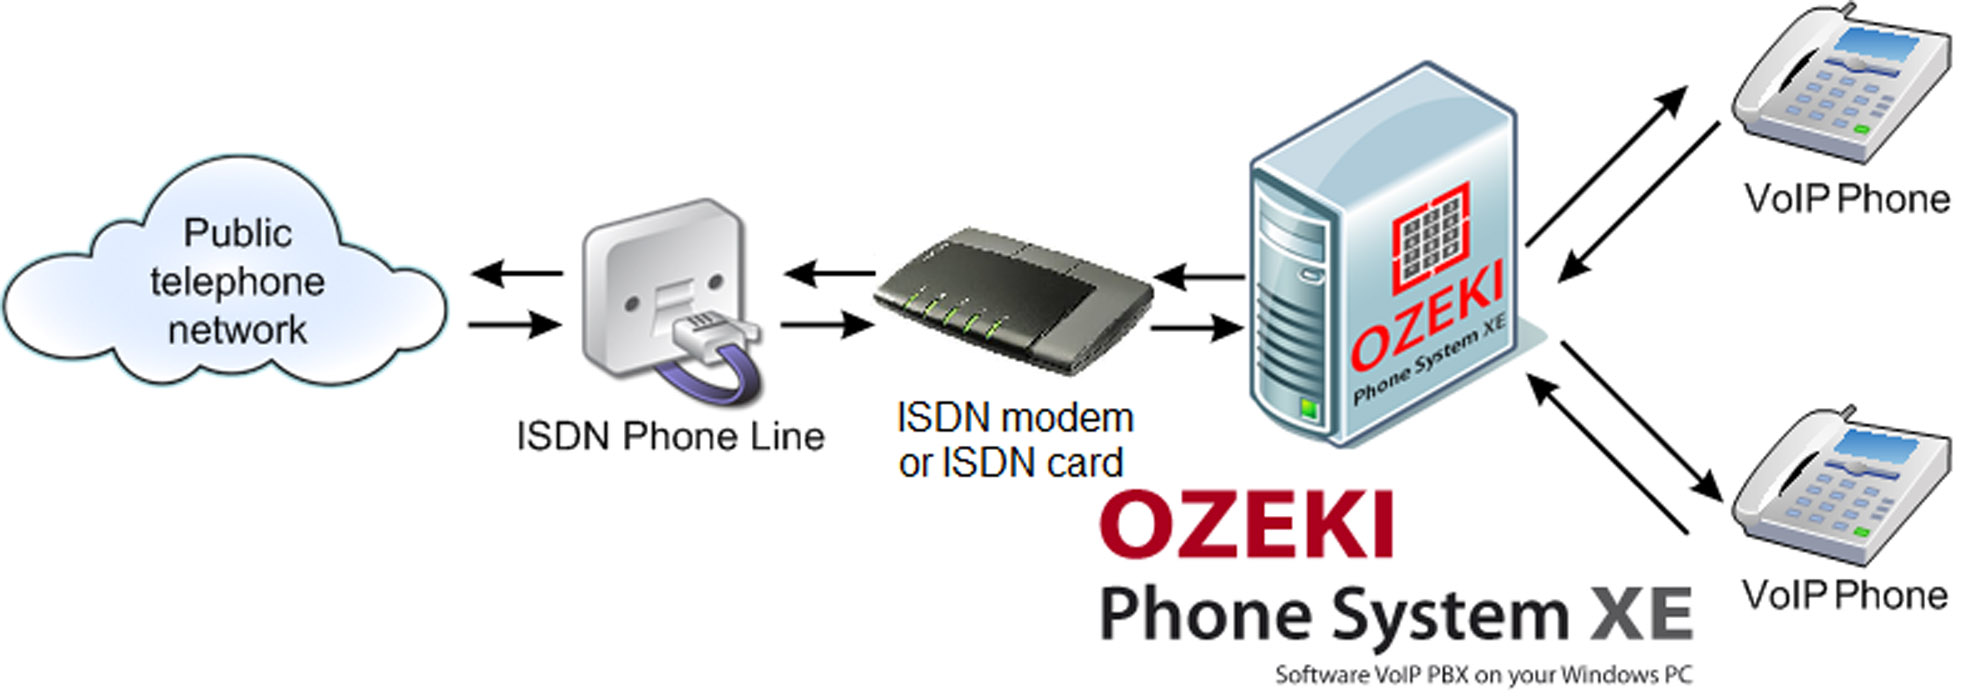 isdn connection with ozeki phone system